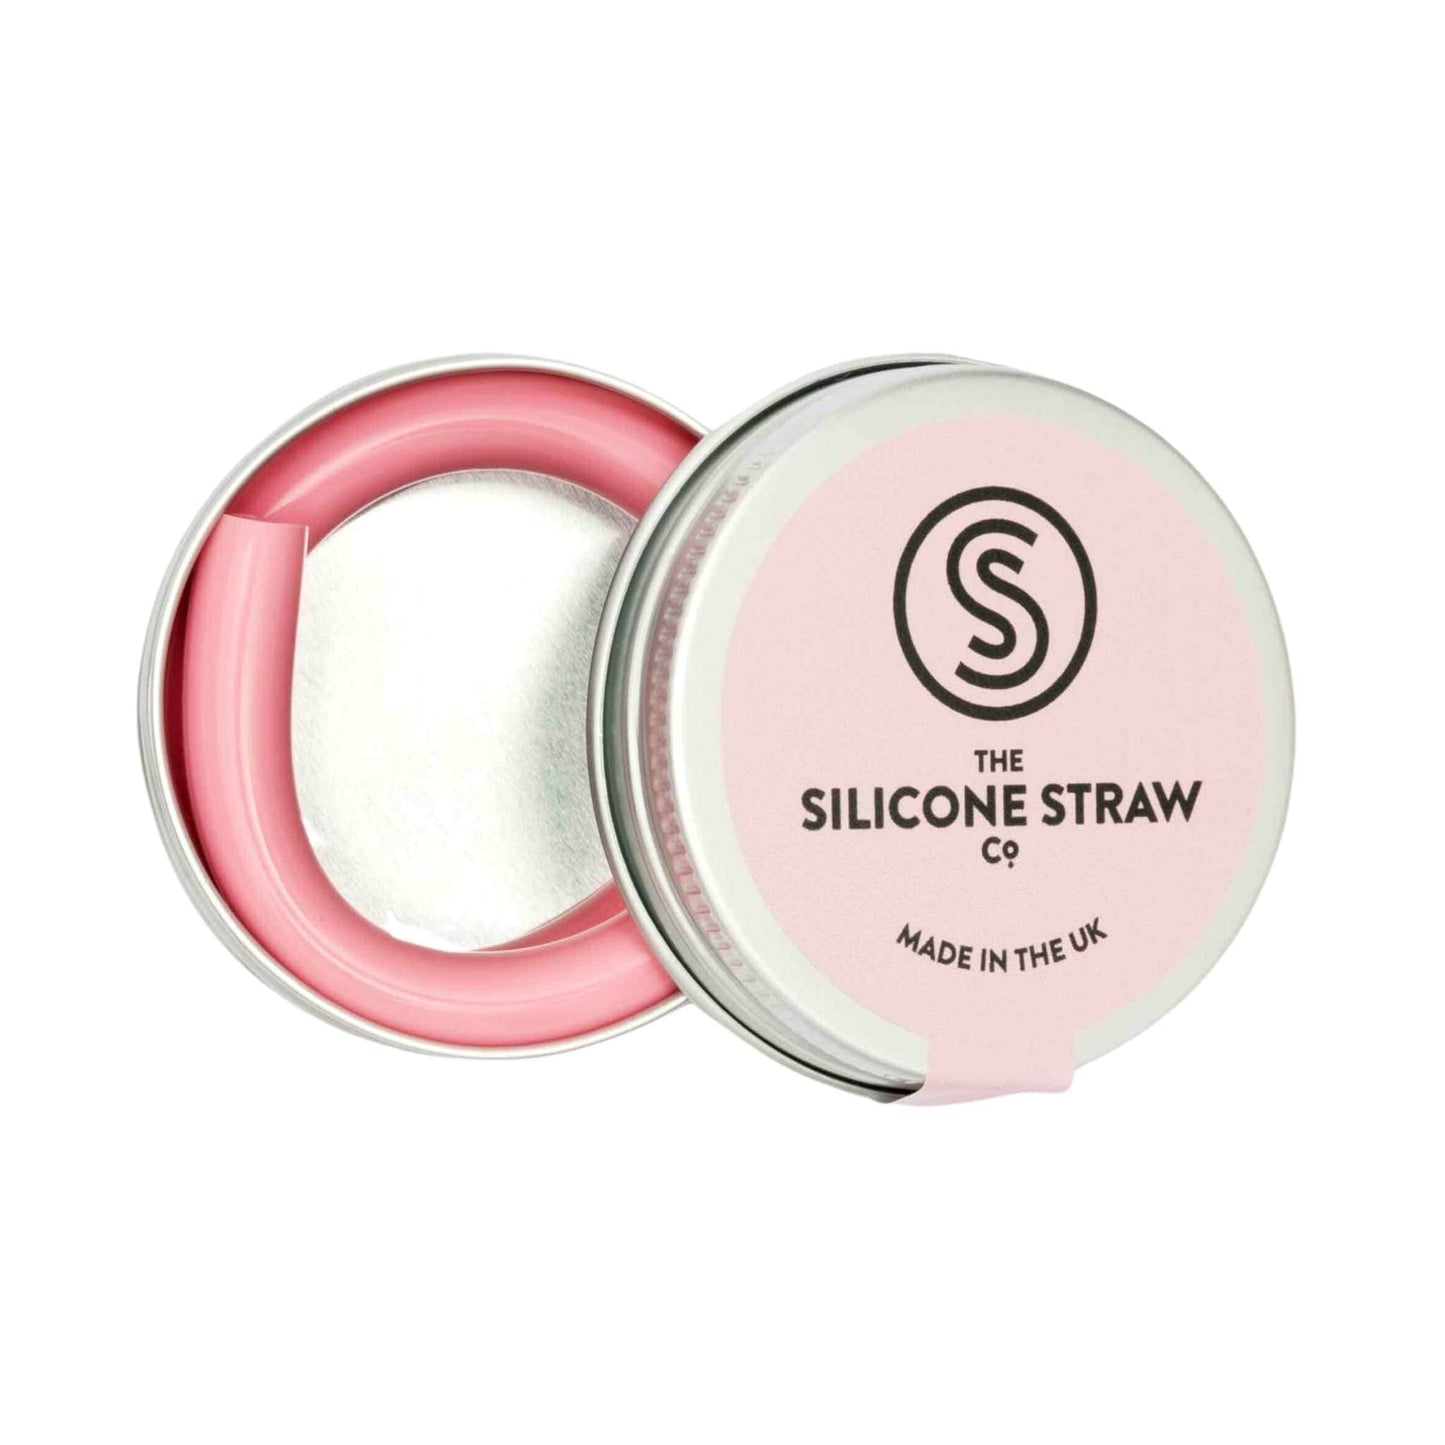 The Silicone Straw Co. Drinking Straws & Stirrers Light Pink Reusable Silicone Straw in Travel Tin - The Silicone Straw Co.